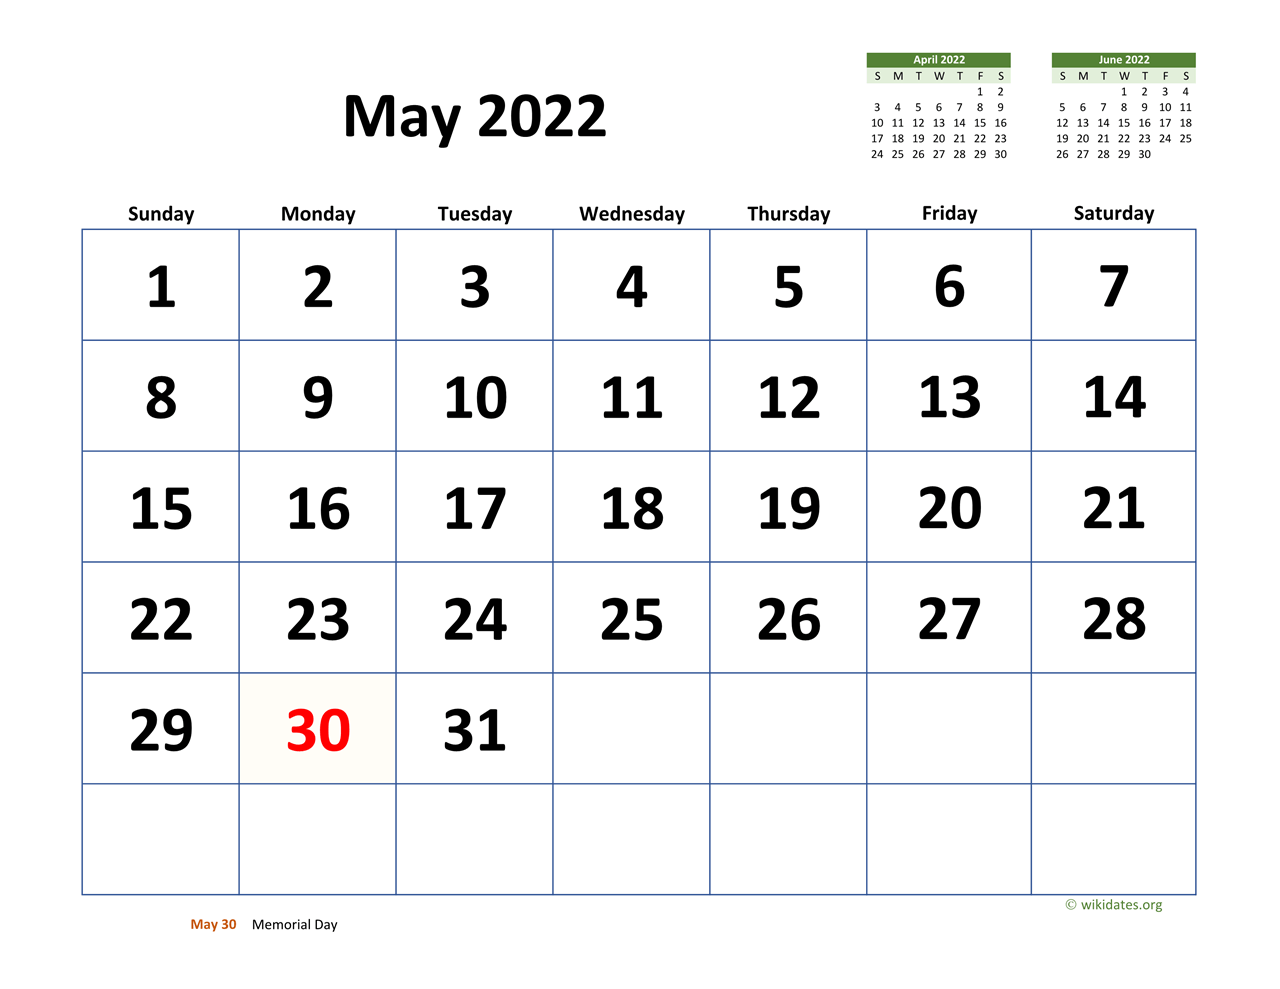 Large May 2022 Calendar May 2022 Calendar With Extra-Large Dates | Wikidates.org